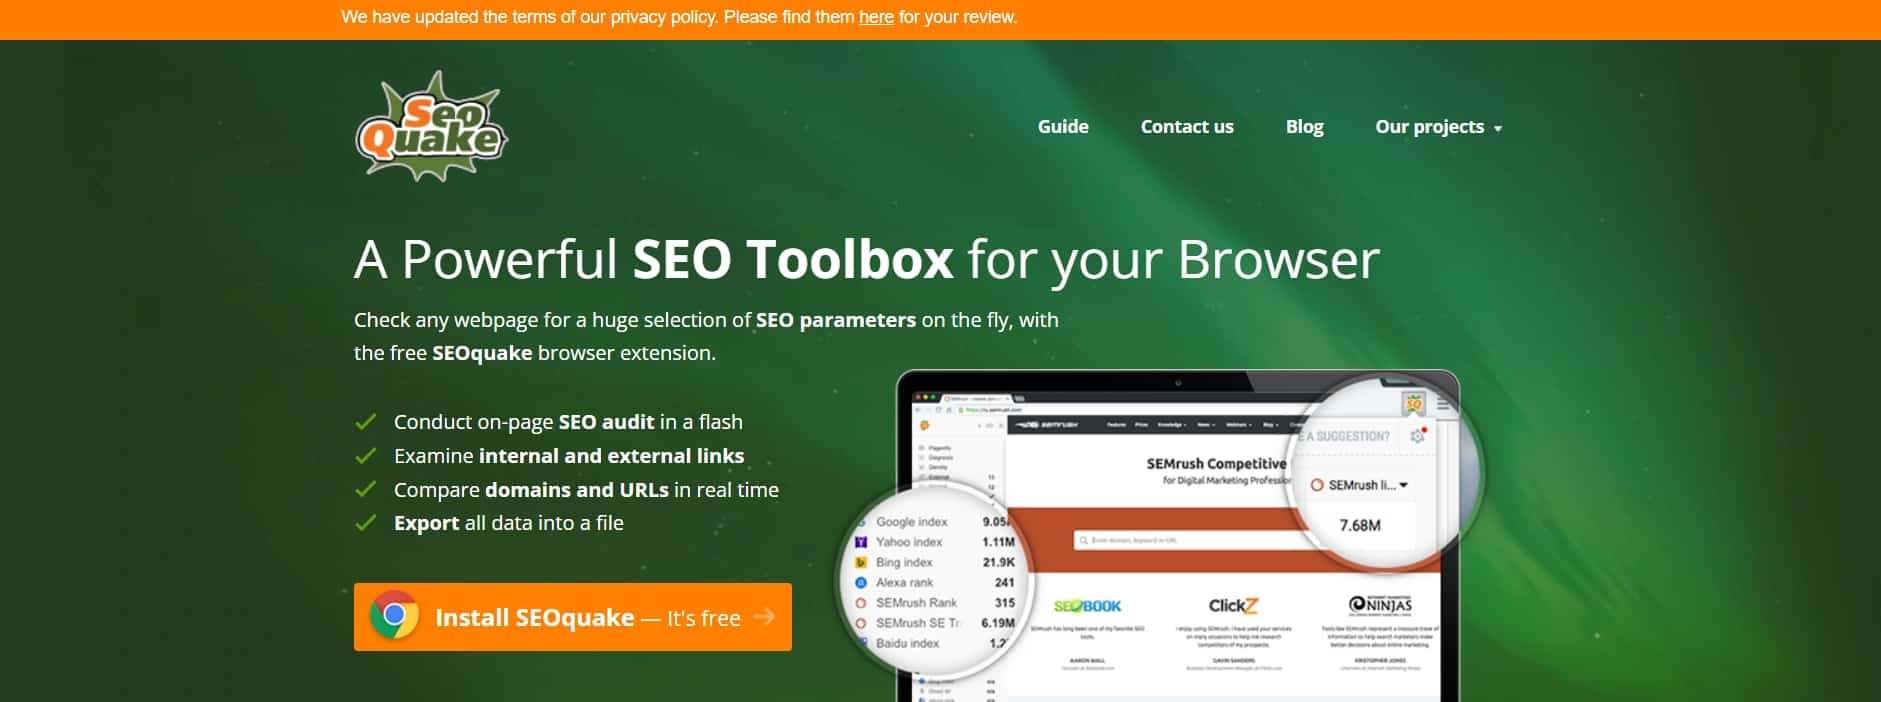 18 Best Search Engine Optimization (SEO) Tools 18